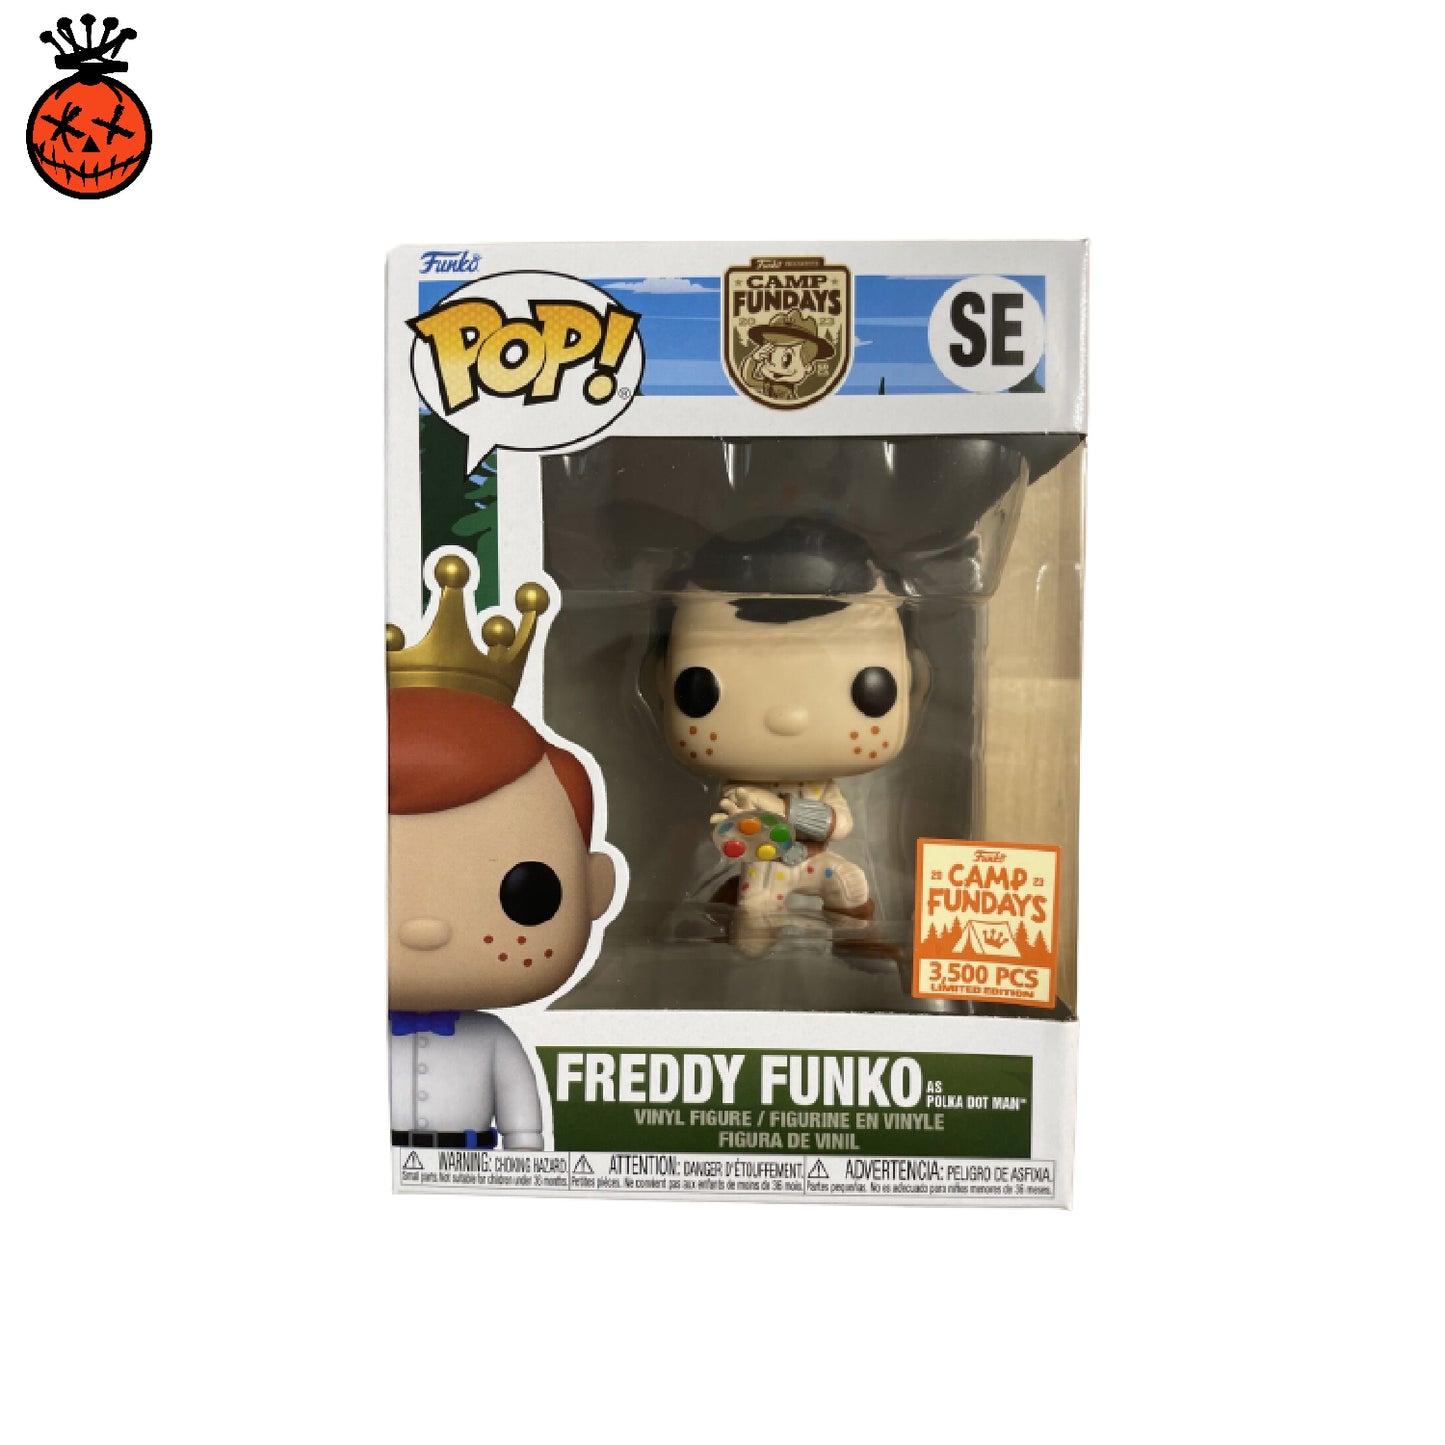 Camp Fundays At Home Freddy Funko as Polka Dot Man Funko Shop Exclusive LE 3,500